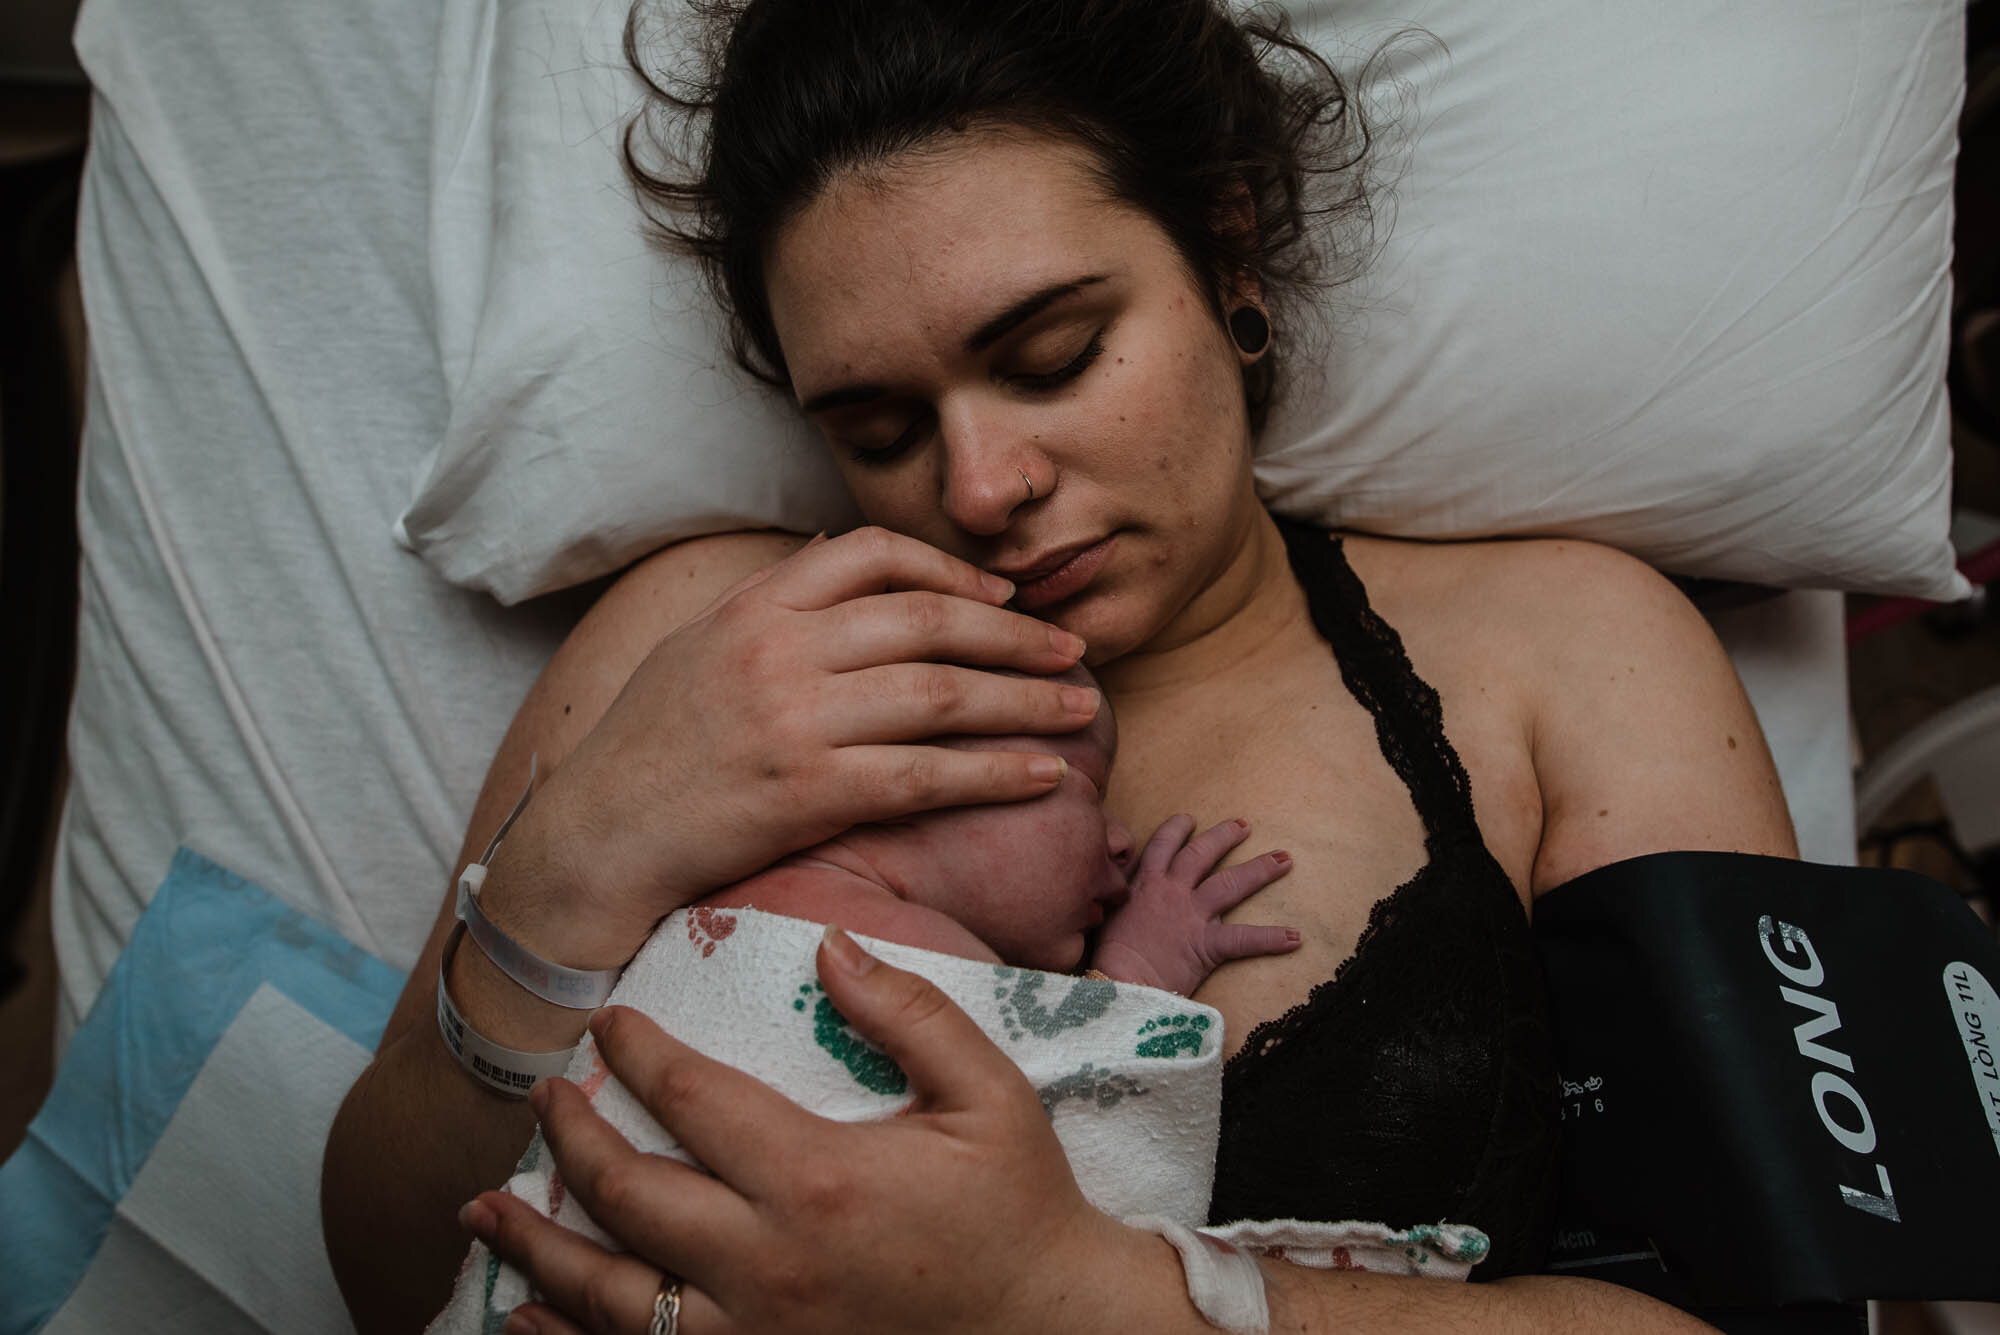 Gather+Birth+Cooperative-+Doula+Support,+Photography,+and+More+in+Minnesota20191114040904.jpg